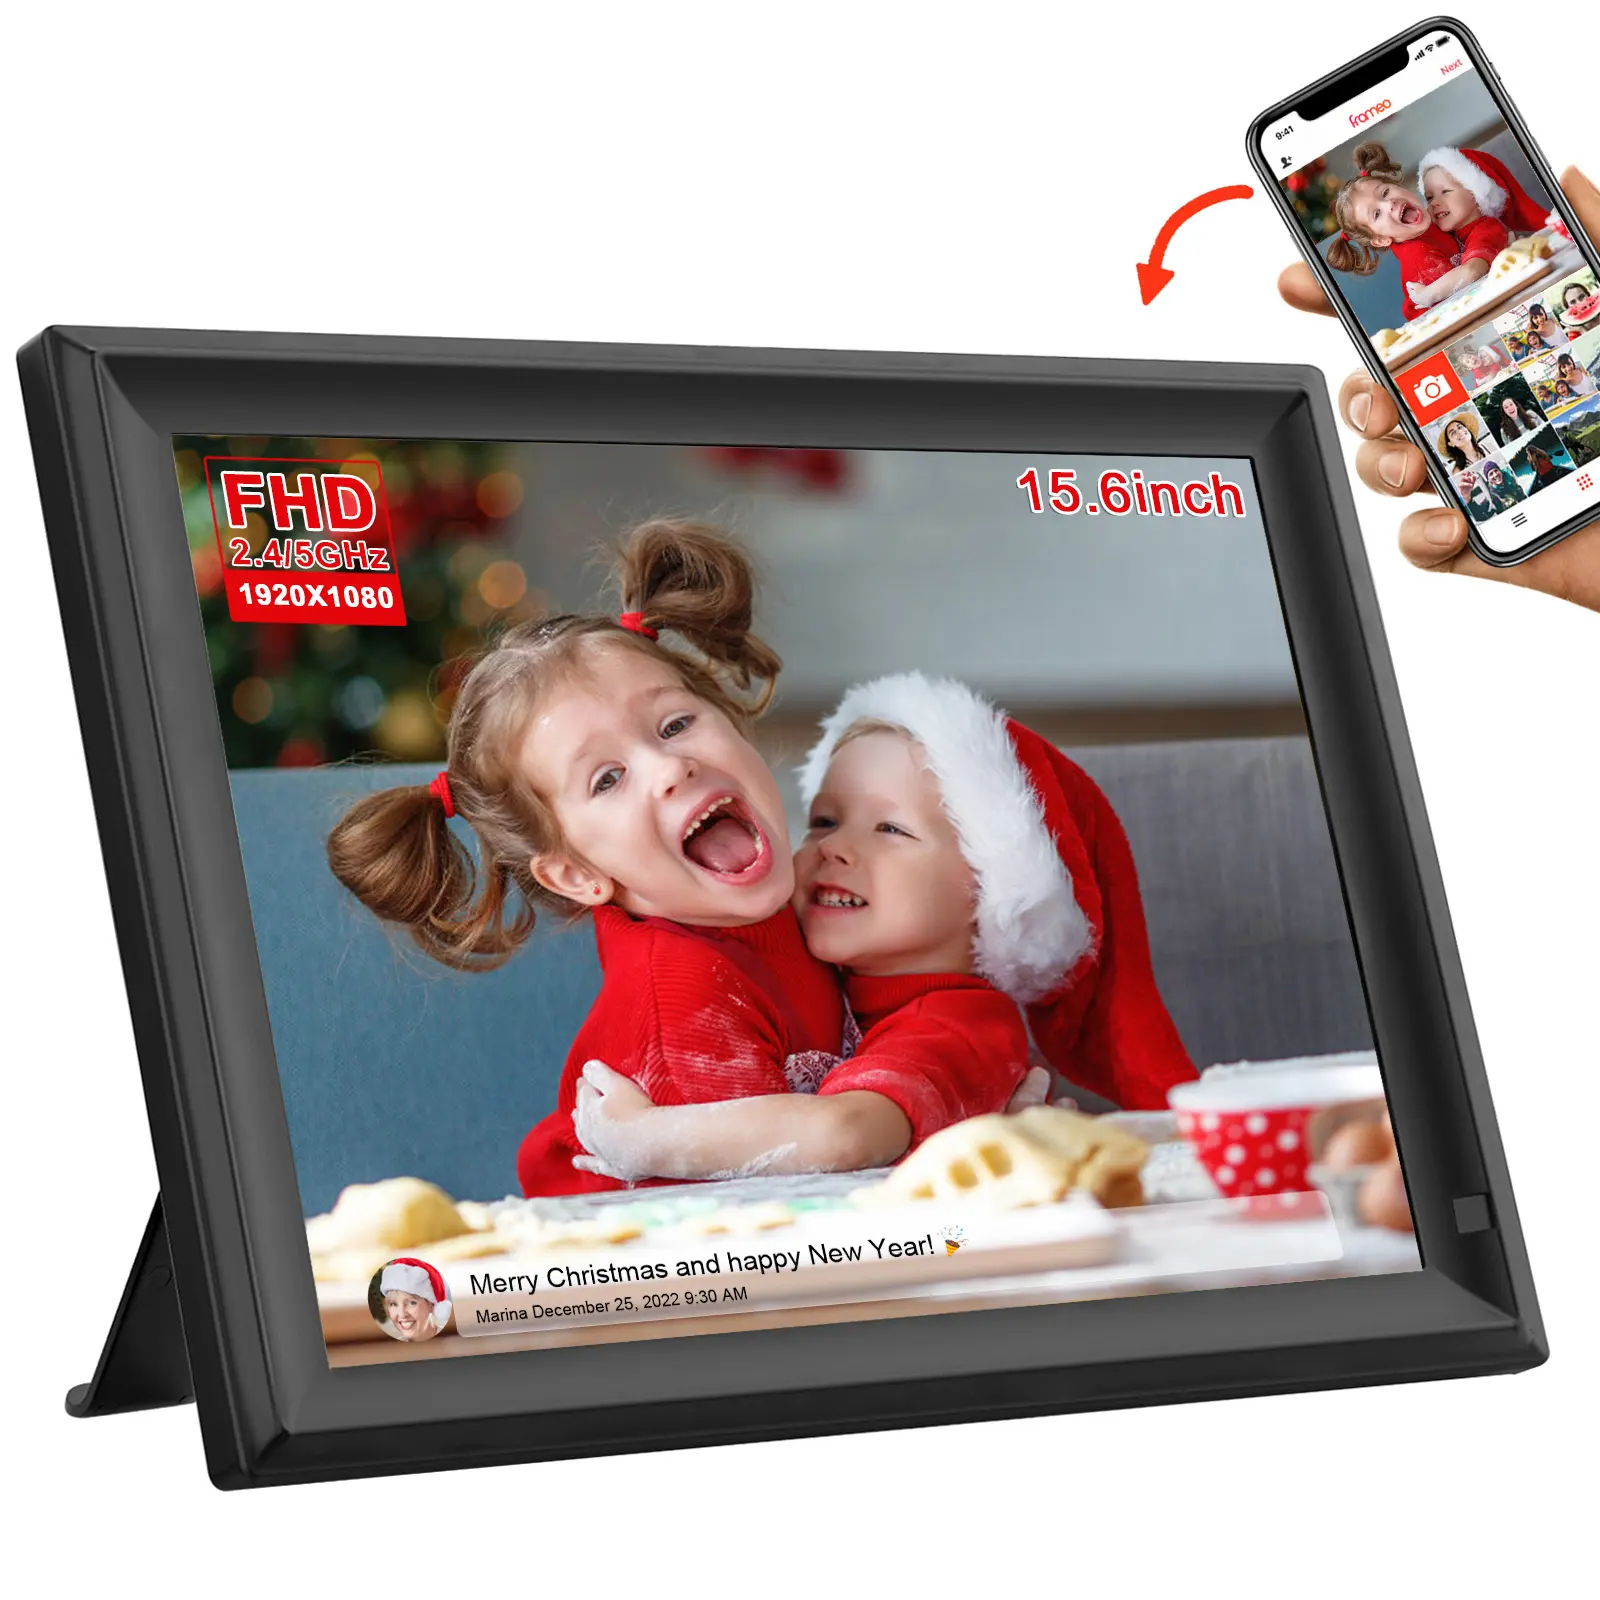 chinese supplier best mp4 video free download hd WiFi 15.6 inch frameo lcd sexy digital photo picture frame